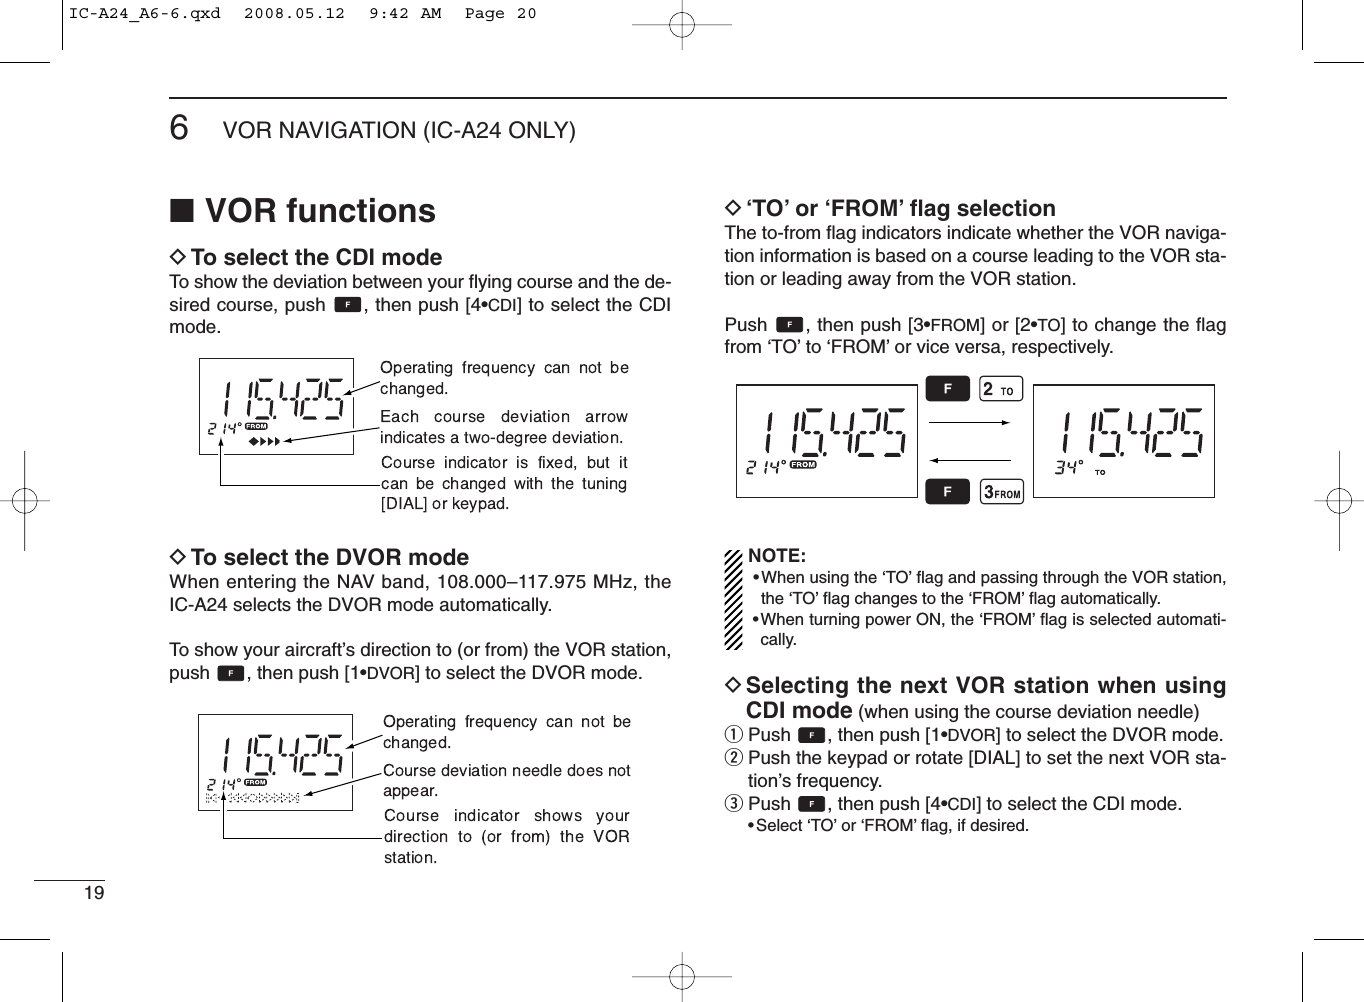 196VOR NAVIGATION (IC-A24 ONLY)■VOR functionsDTo select the CDI modeTo show the deviation between your ﬂying course and the de-sired course, push  , then push [4•CDI] to select the CDImode.DTo select the DVOR modeWhen entering the NAV band, 108.000–117.975 MHz, theIC-A24 selects the DVOR mode automatically.To show your aircraft’s direction to (or from) the VOR station,push  , then push [1•DVOR] to select the DVOR mode.D‘TO’or ‘FROM’ﬂag selectionThe to-from ﬂag indicators indicate whether the VOR naviga-tion information is based on a course leading to the VOR sta-tion or leading away from the VOR station.Push  , then push [3•FROM] or [2•TO] to change the ﬂagfrom ‘TO’to ‘FROM’or vice versa, respectively.NOTE:•When using the ‘TO’ﬂag and passing through the VOR station,the ‘TO’ﬂag changes to the ‘FROM’ﬂag automatically.•When turning power ON, the ‘FROM’ﬂag is selected automati-cally.DSelecting the next VOR station when usingCDI mode (when using the course deviation needle)qPush  , then push [1•DVOR] to select the DVOR mode.wPush the keypad or rotate [DIAL] to set the next VOR sta-tion’s frequency.ePush  , then push [4•CDI] to select the CDI mode.•Select ‘TO’or ‘FROM’ﬂag, if desired.IC-A24_A6-6.qxd  2008.05.12  9:42 AM  Page 20